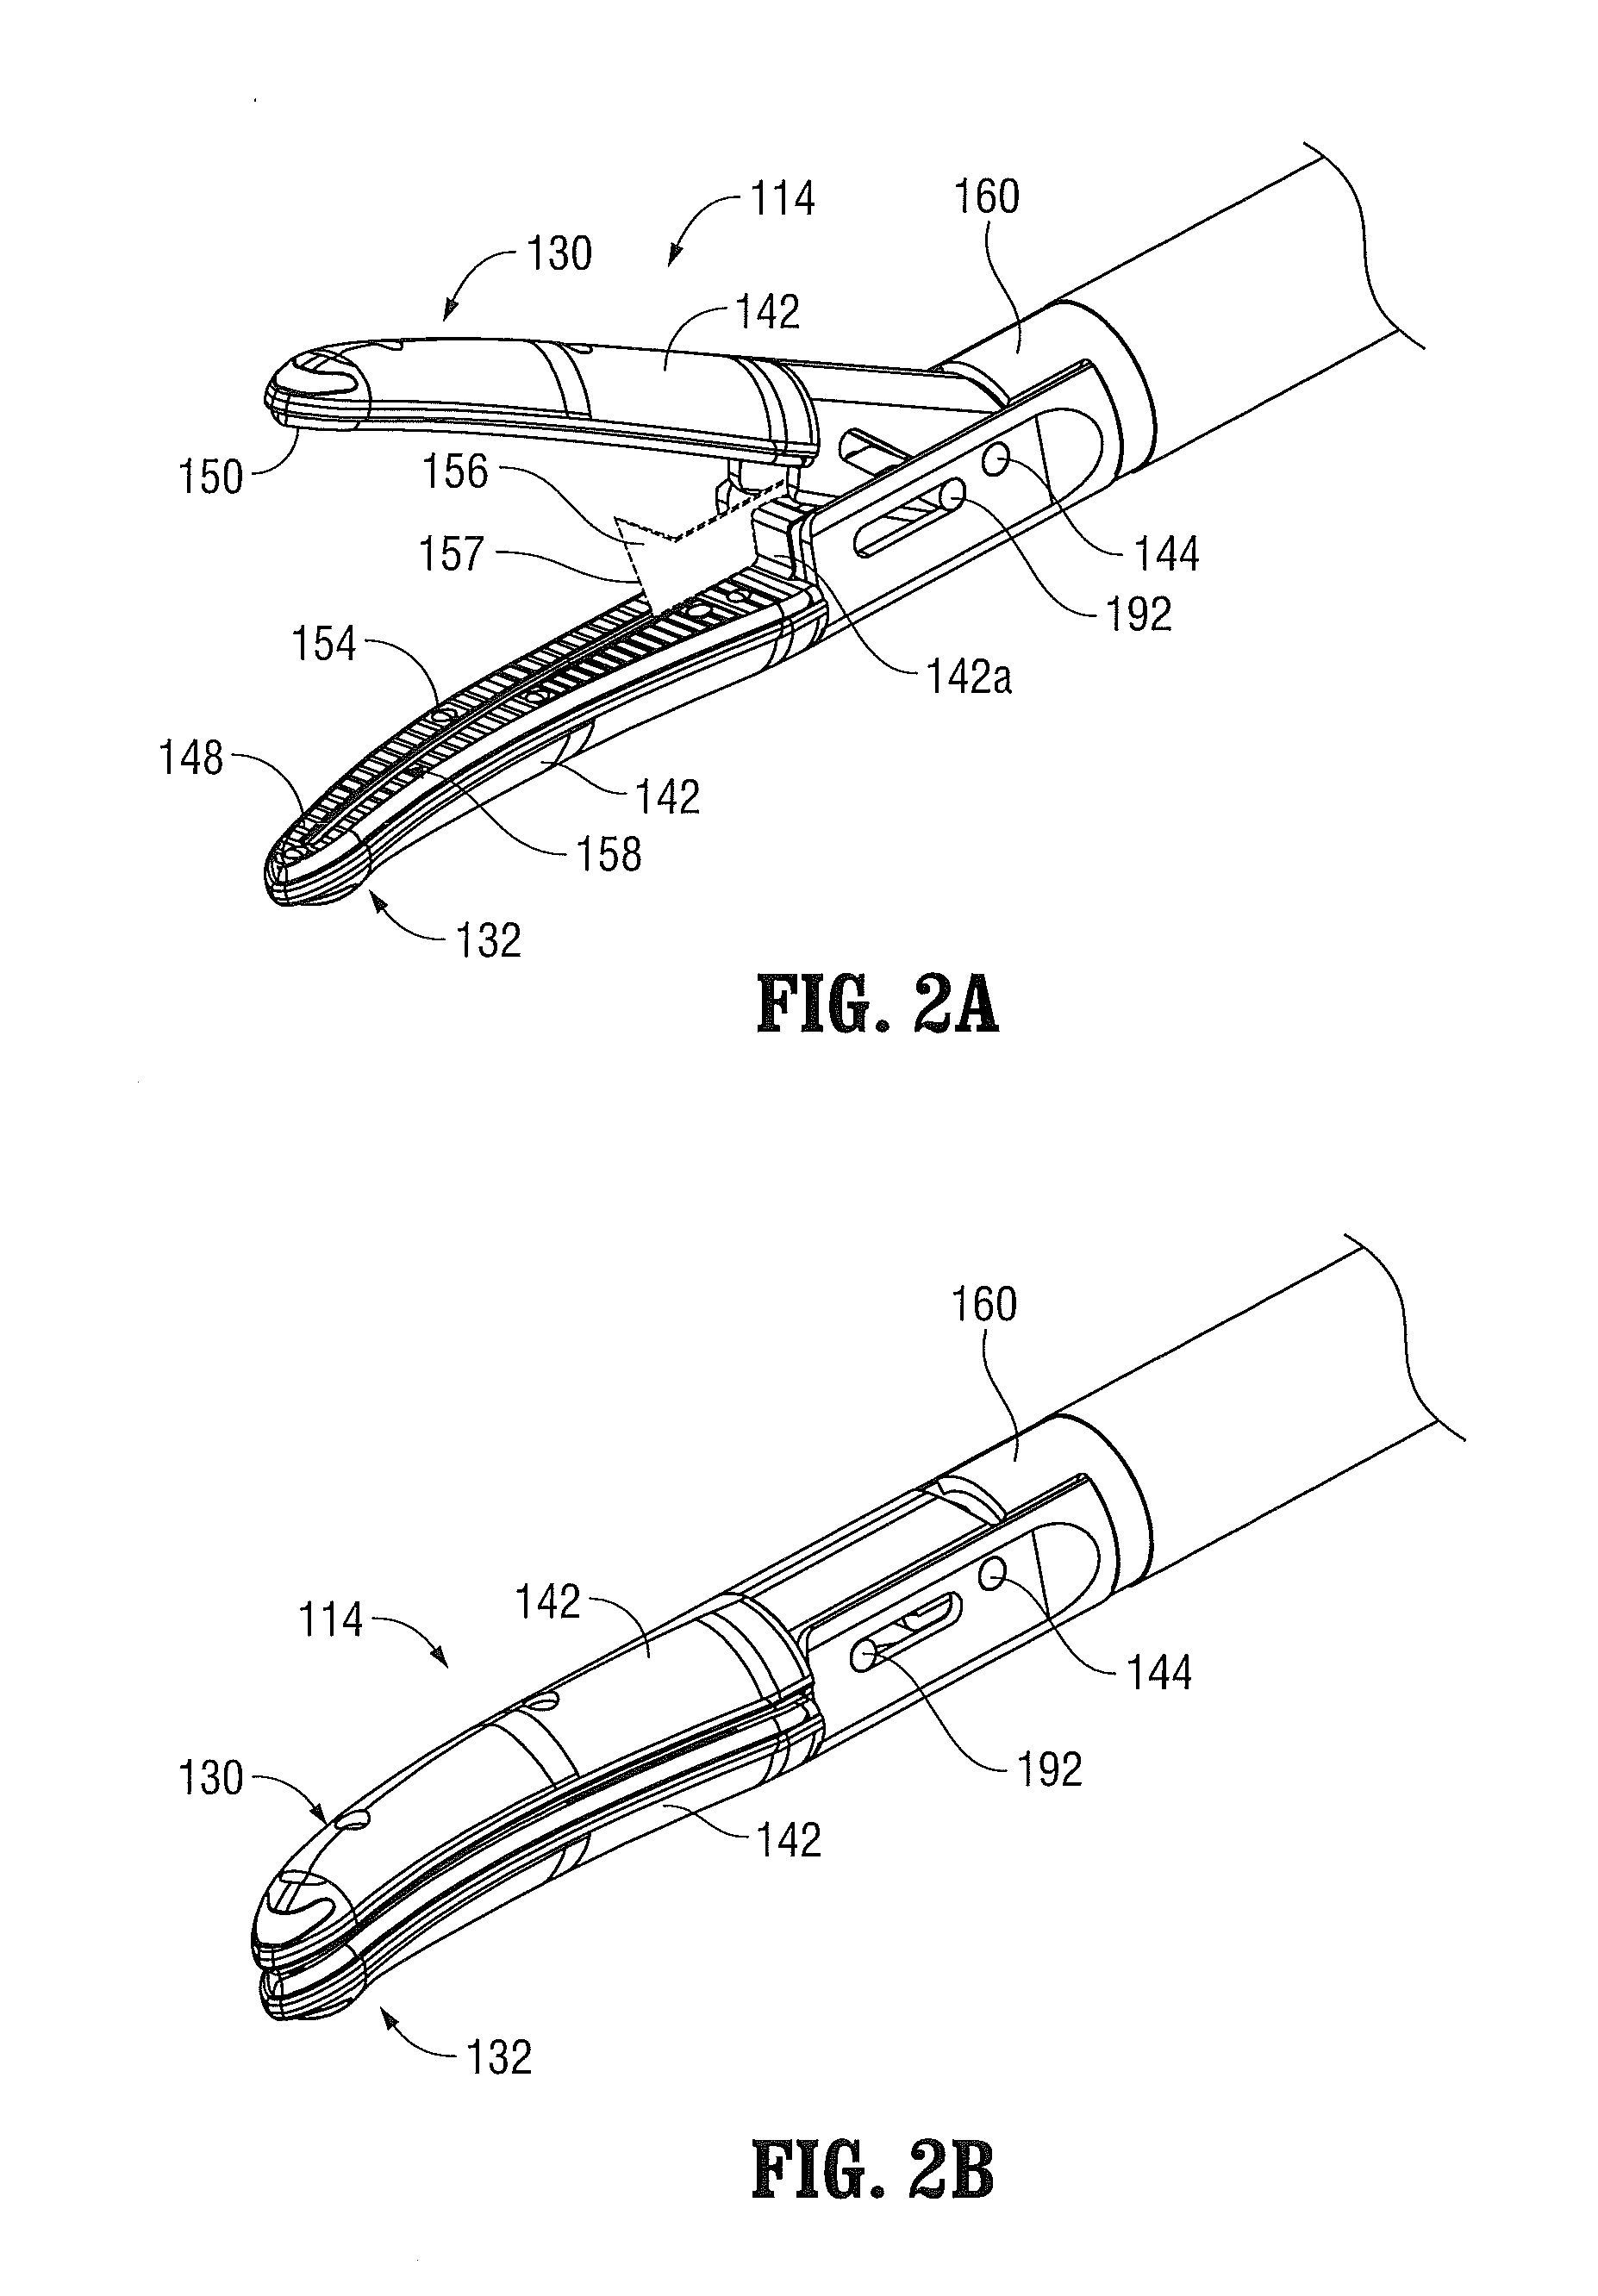 Wire retention unit for a surgical instrument